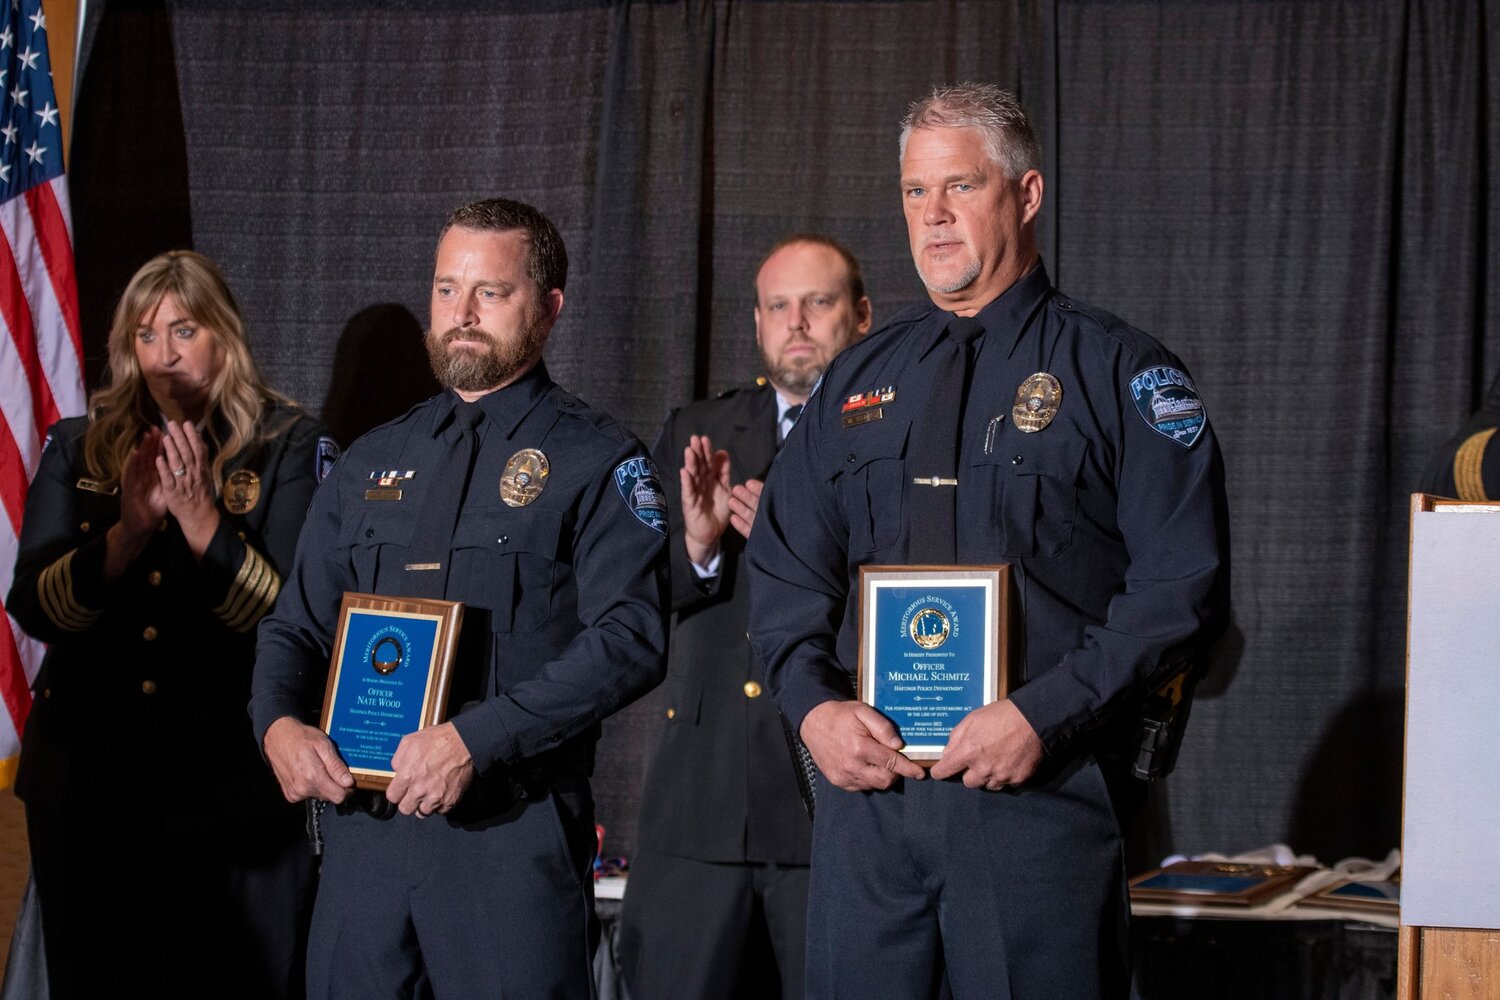 Hastings Police Department Officer Michael Schmitz and Officer Nate Wood were recognized with Meritorious Service Awards at the Minnesota Chiefs of Police Conference.